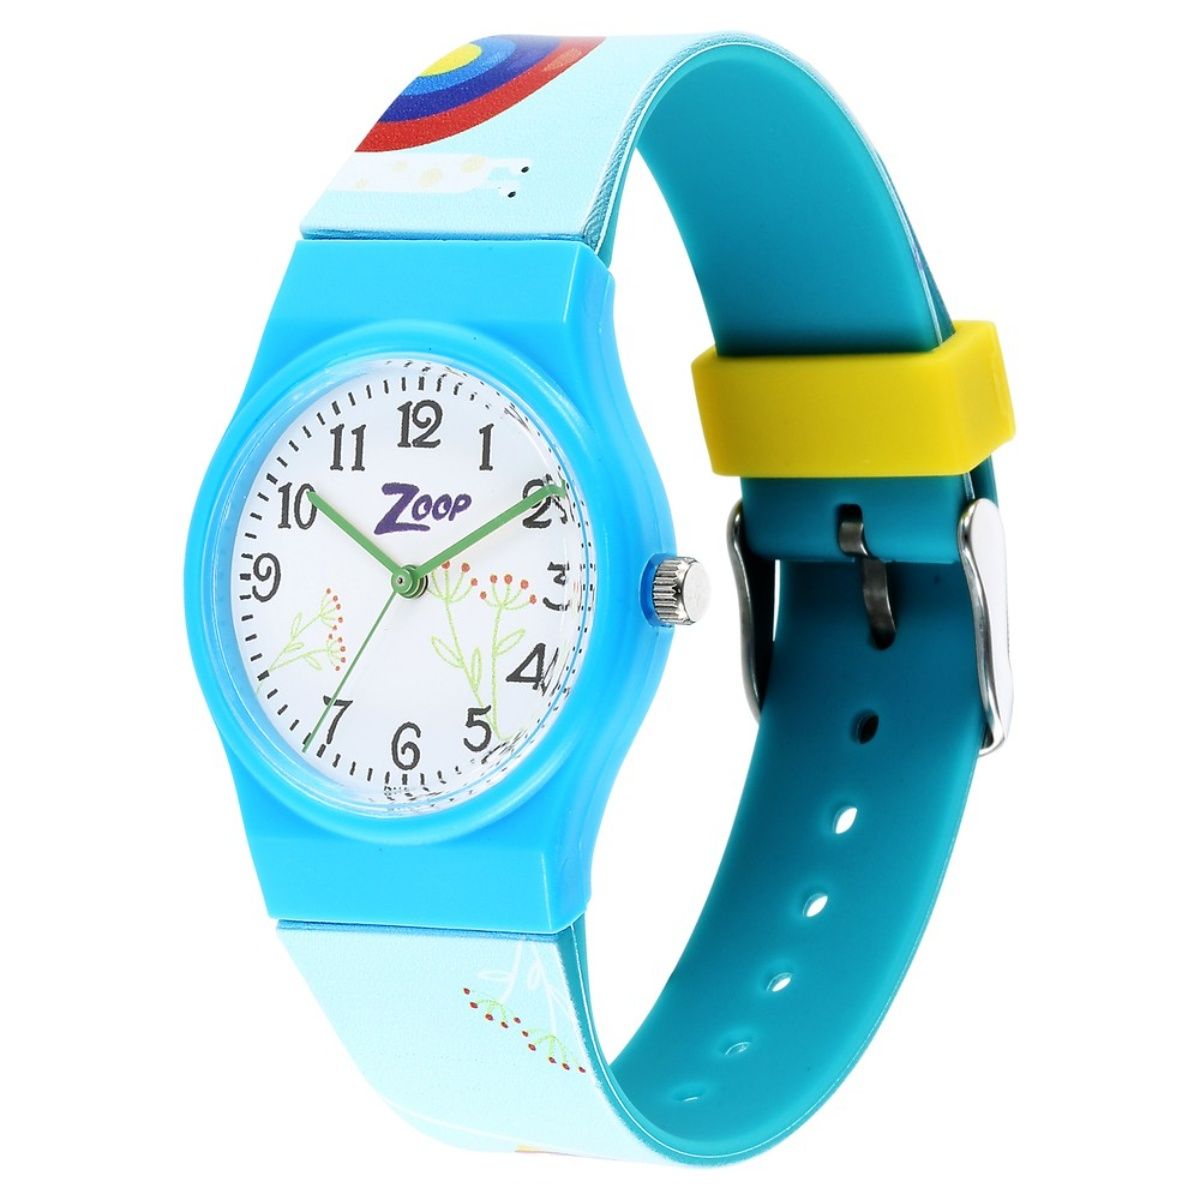 Buy Zoop Analog Girl's Watch (Purple Dial Multi Colored Strap) at Amazon.in